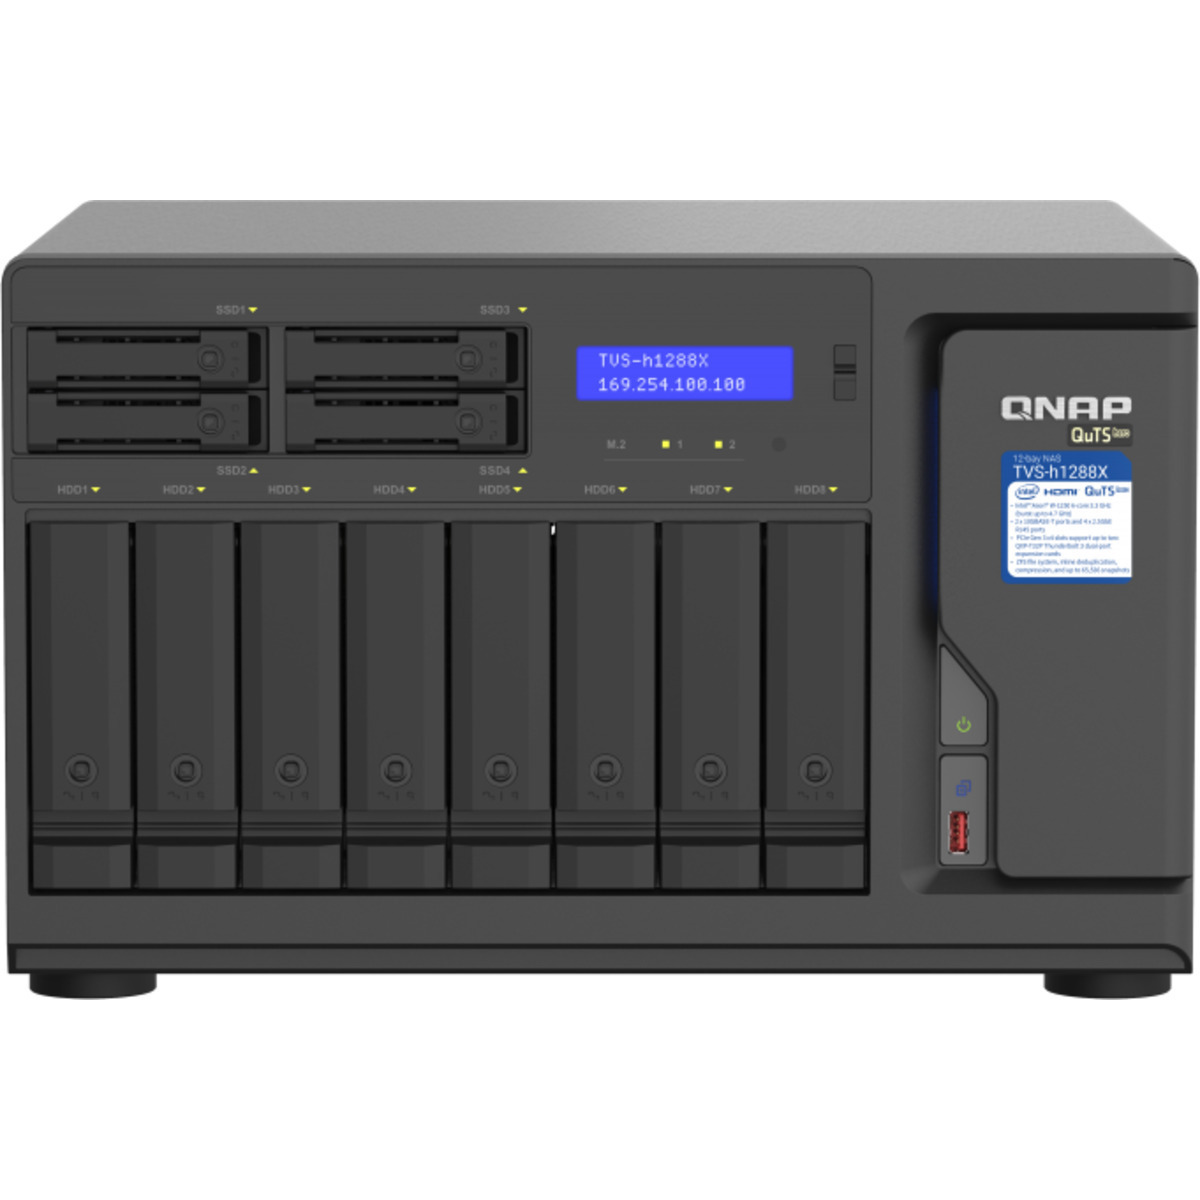 QNAP TVS-h1288X QuTS hero NAS 120tb 8+4-Bay Desktop Multimedia / Power User / Business NAS - Network Attached Storage Device 5x24tb Seagate IronWolf Pro ST24000NT002 3.5 7200rpm SATA 6Gb/s HDD NAS Class Drives Installed - Burn-In Tested TVS-h1288X QuTS hero NAS